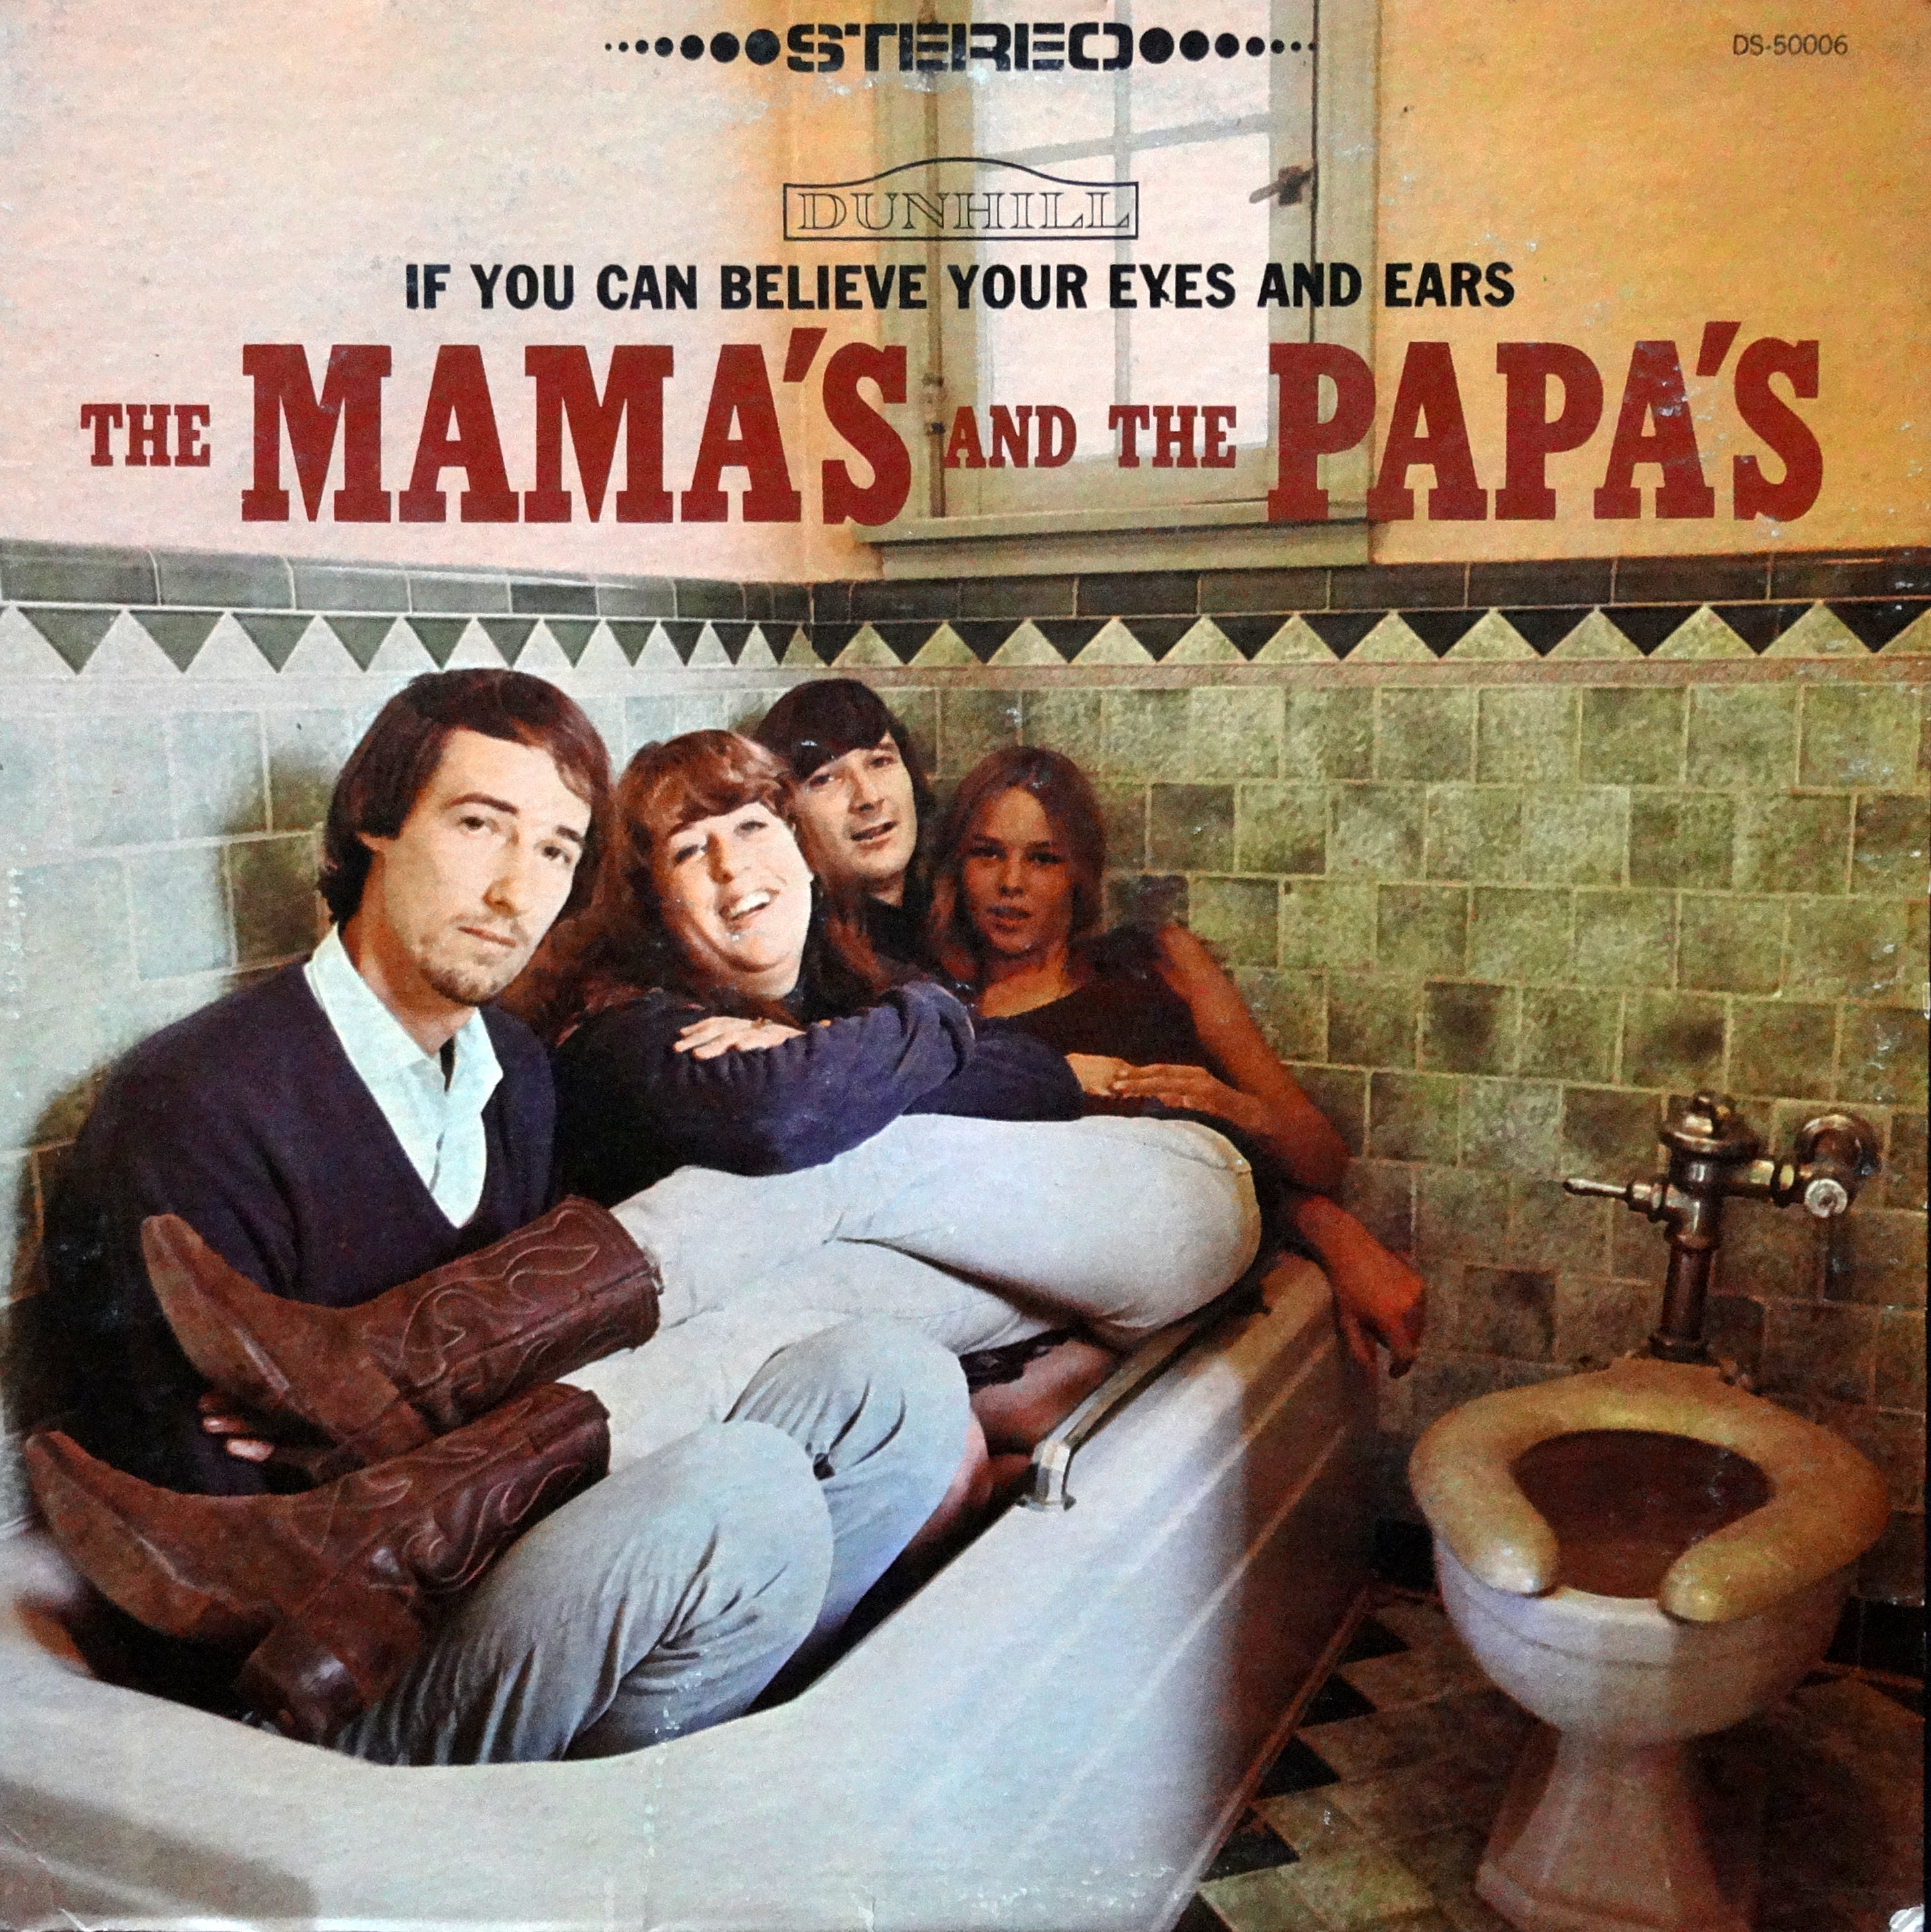 From The Stacks: The Mama's and the Papa's, 'If You Can Believe Your Eyes and Ears' – Why It Matters